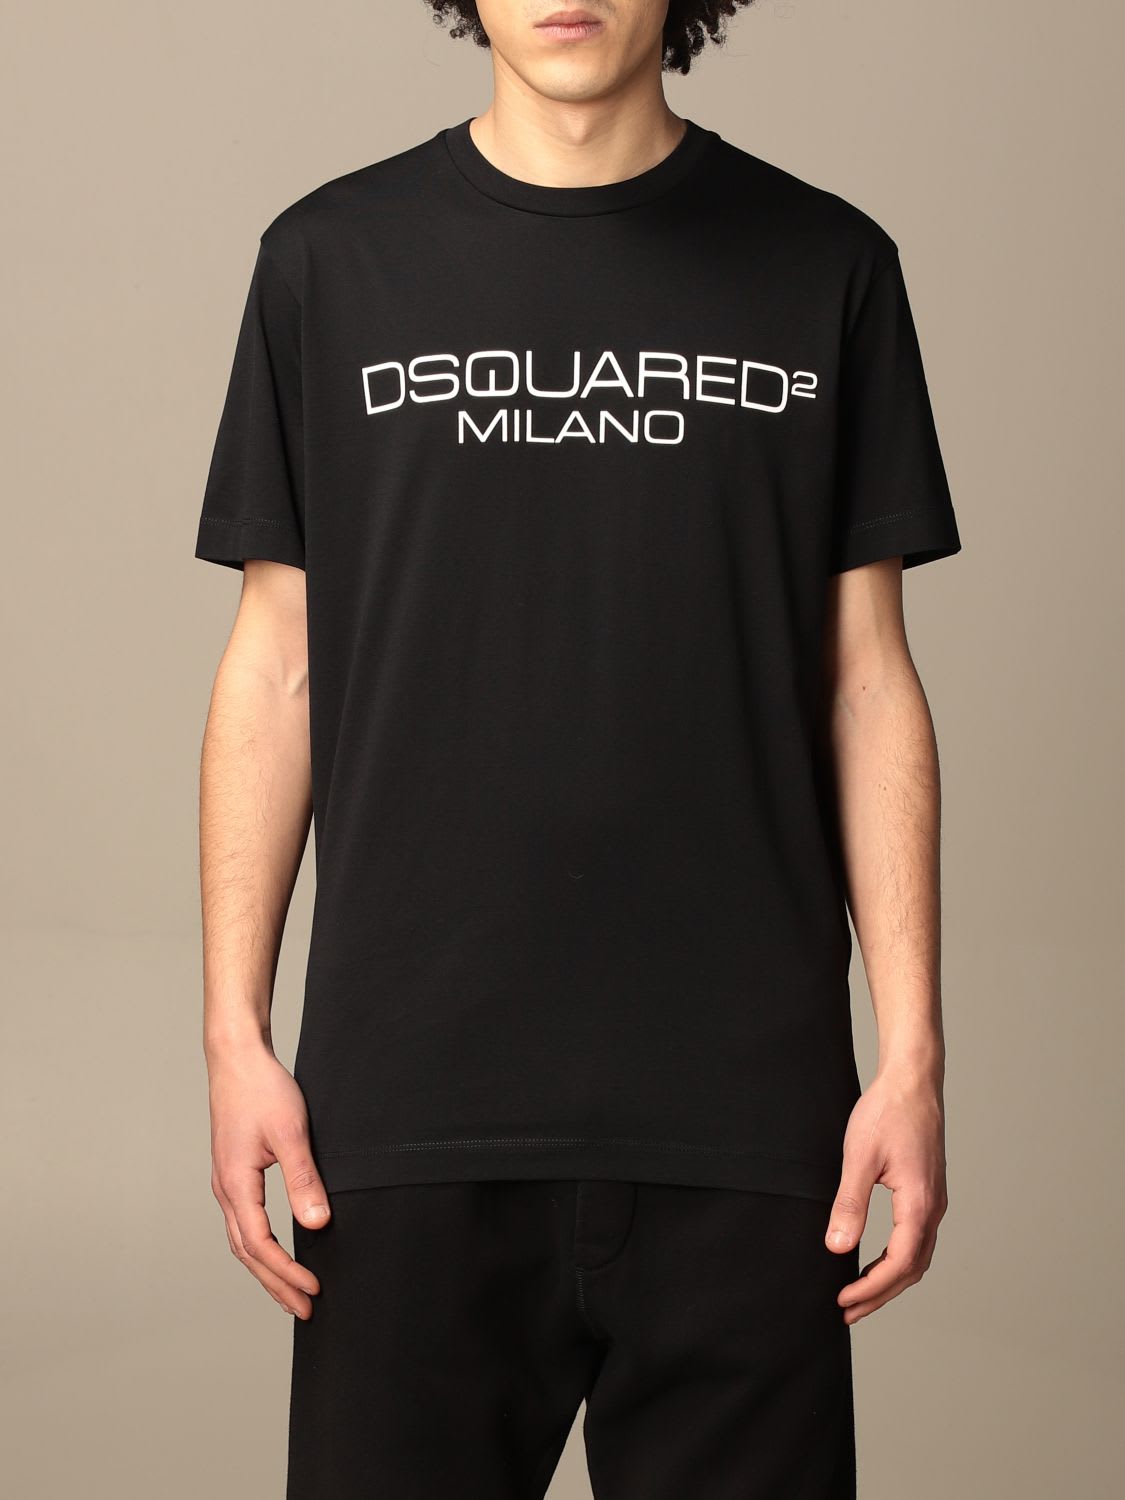 DSQUARED2 T-SHIRT DSQUARED2 COTTON T-SHIRT WITH LOGO,S71GD1055 S22844 900